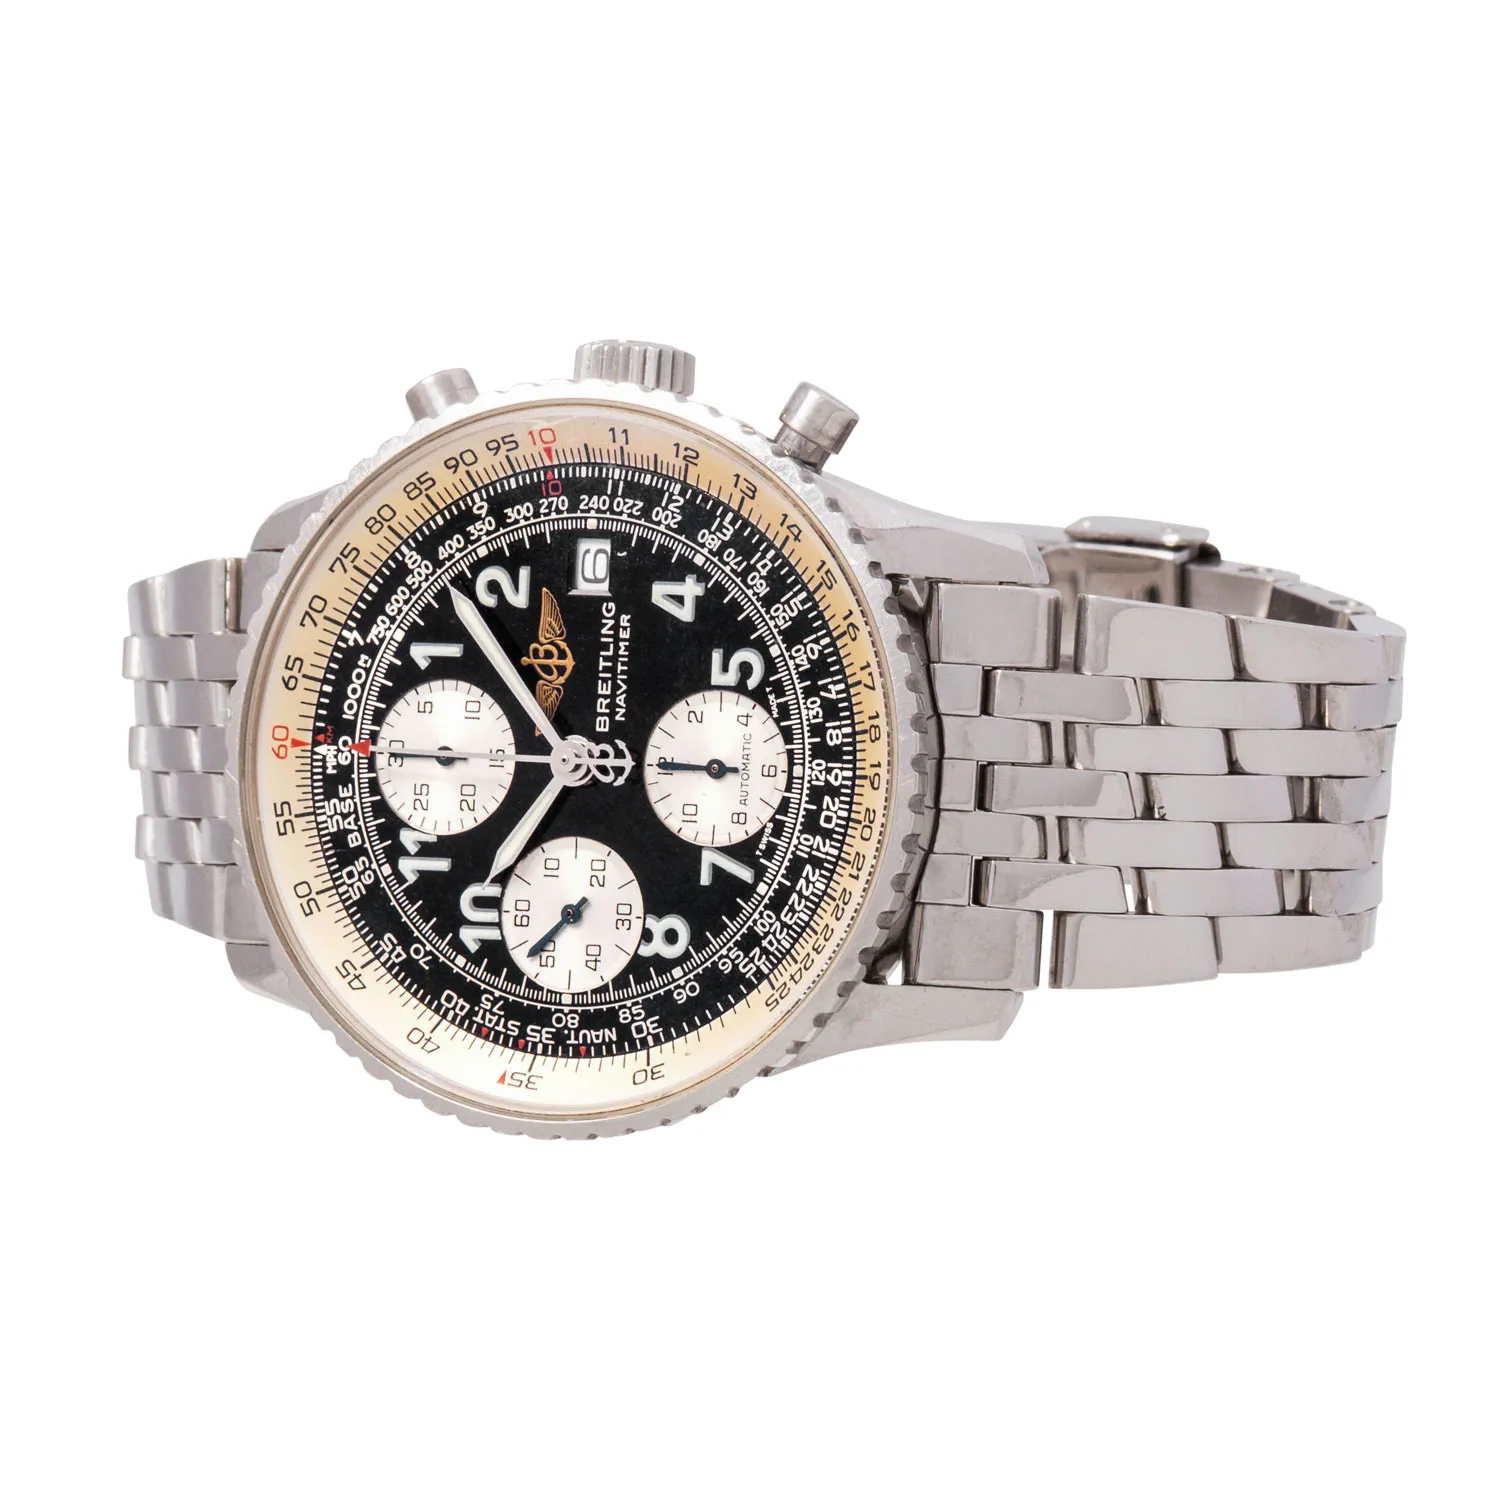 Breitling Old Navitimer A13322-165 41.5mm Stainless steel 5